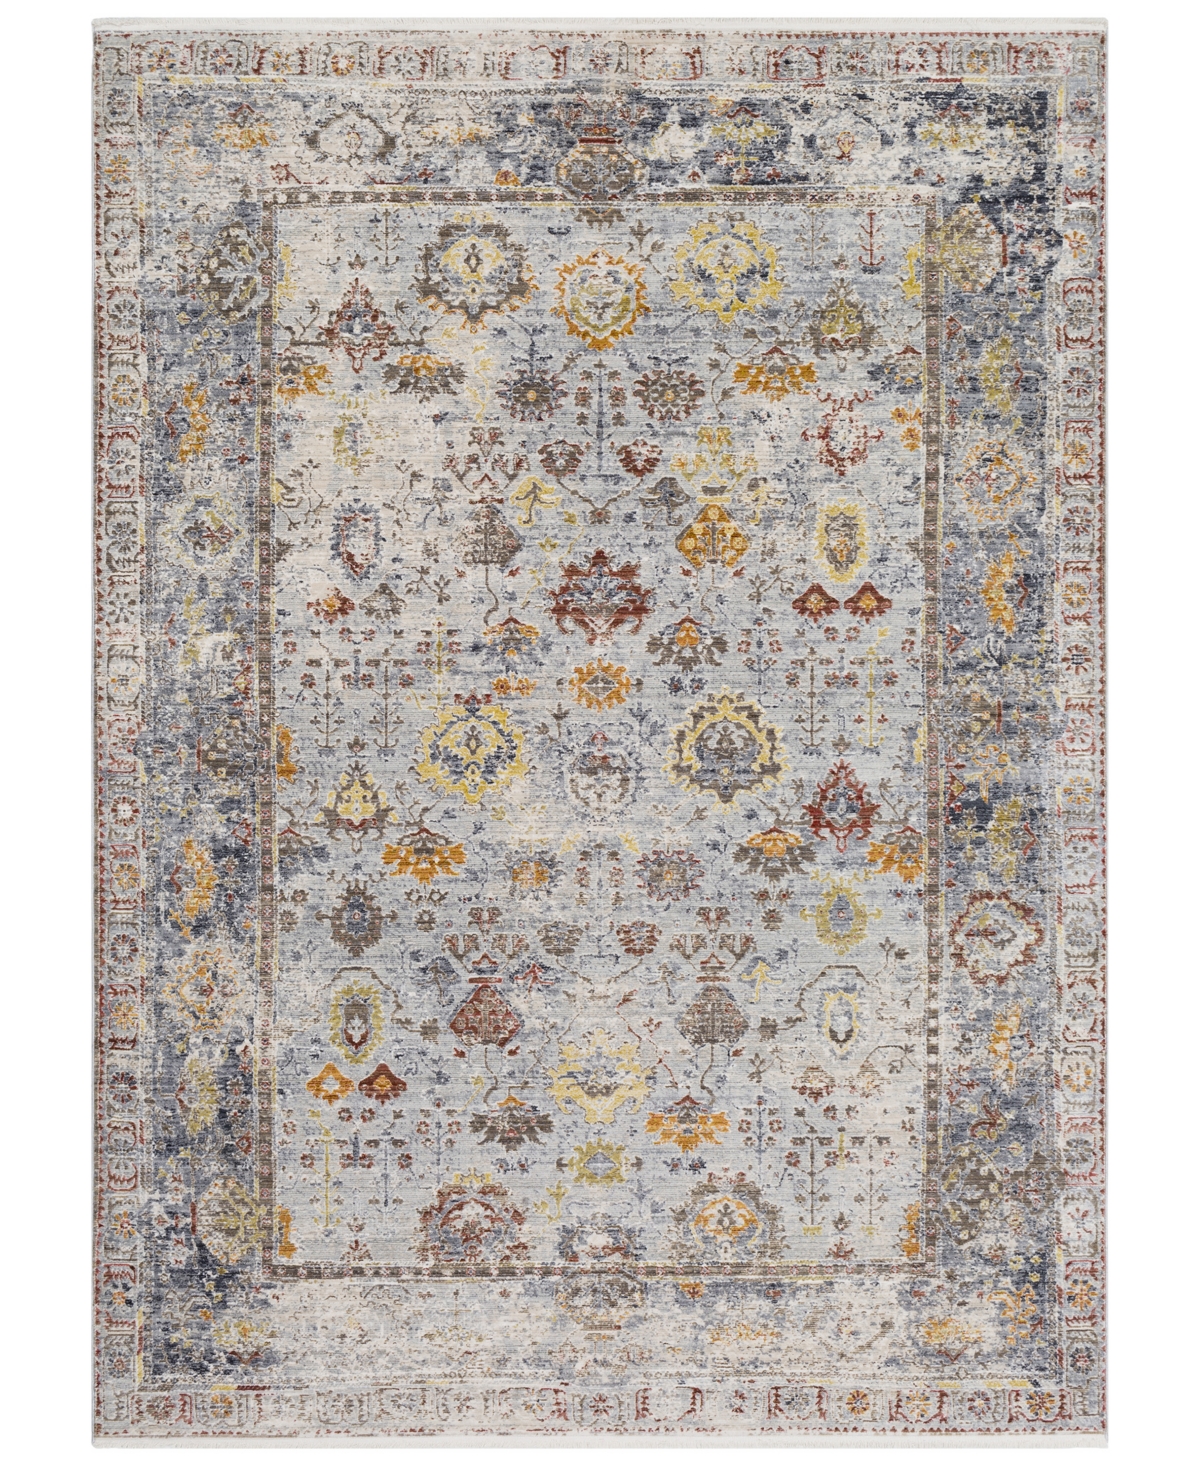 Surya Liverpool Lvp-2300 Charcoal 3'11in x 5'7in Area Rug - Charcoal